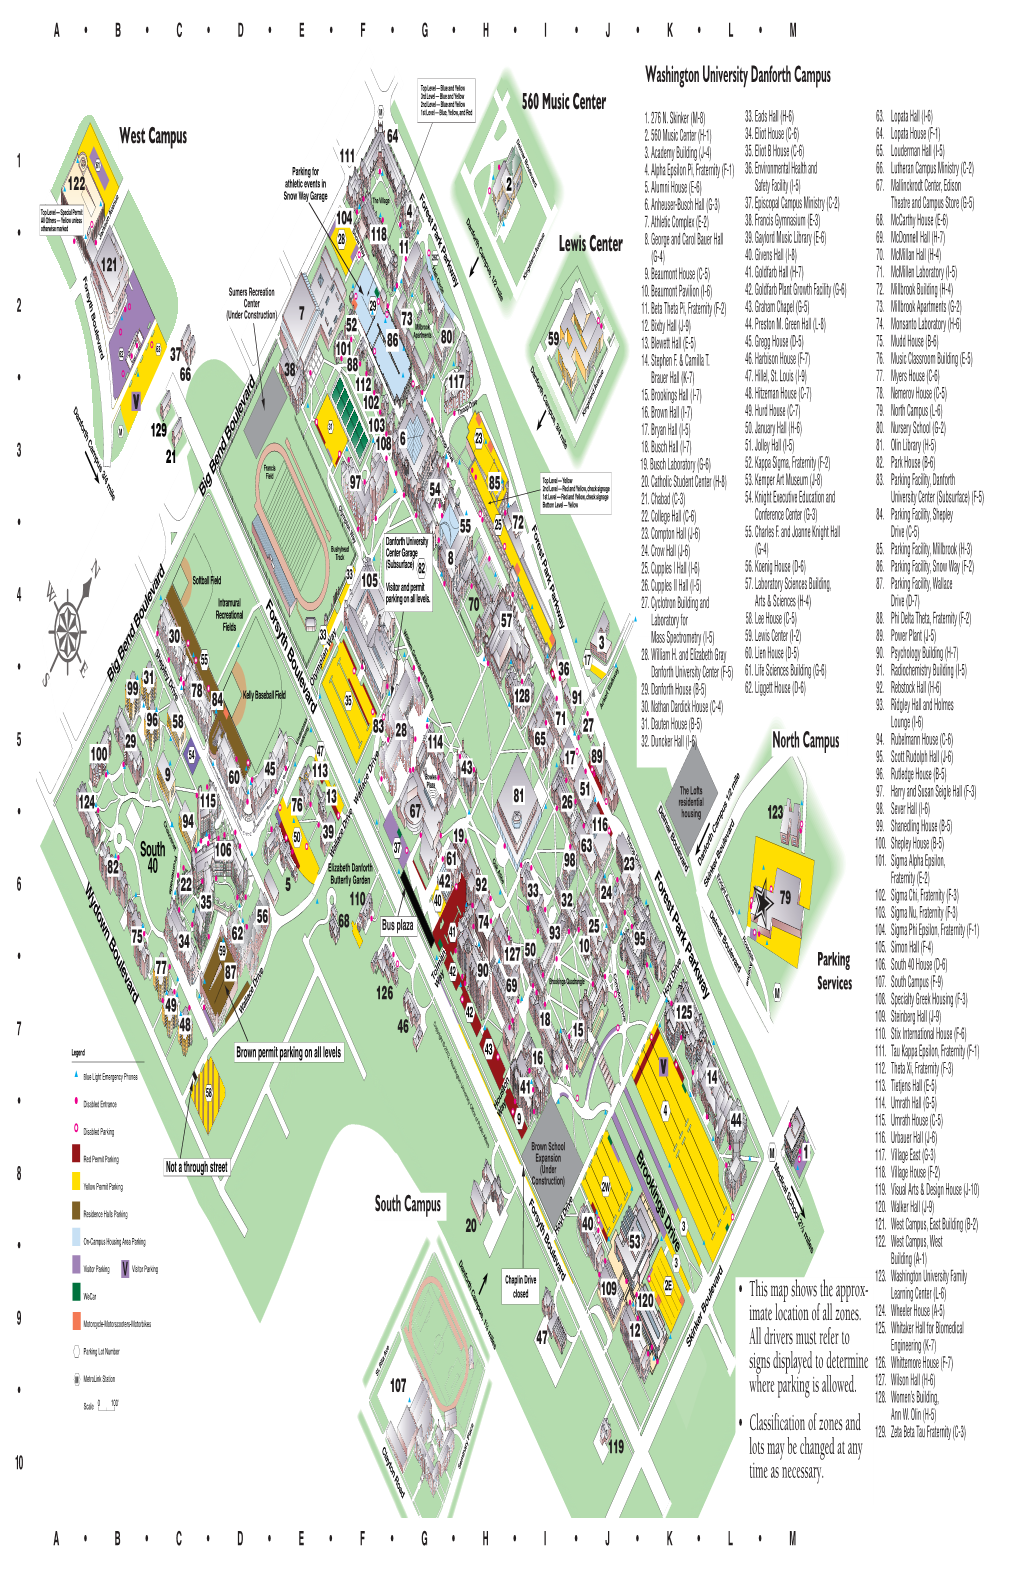 Washington University Danforth Campus • This Map Shows the Approx